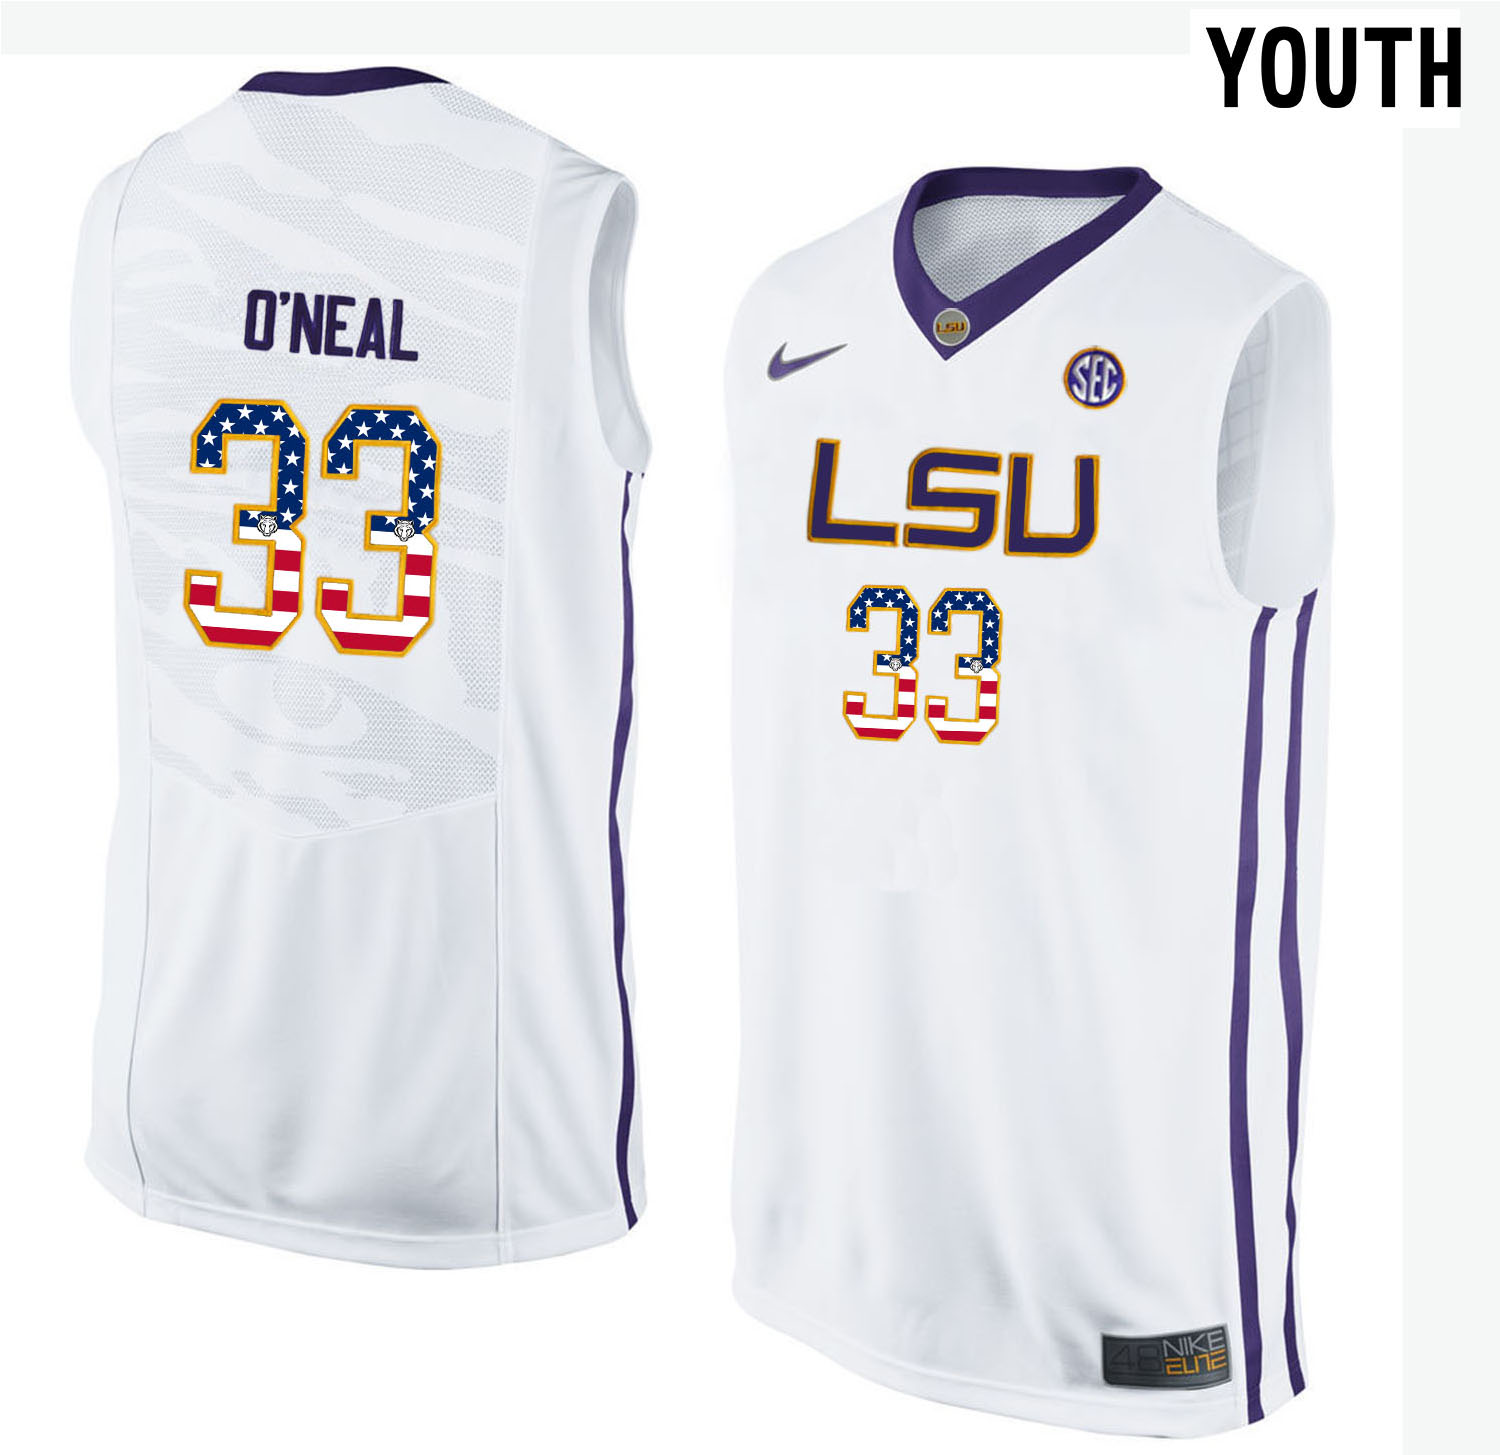 LSU Tigers 33 Shaquille O'Neal White Youth College Basketball Jersey